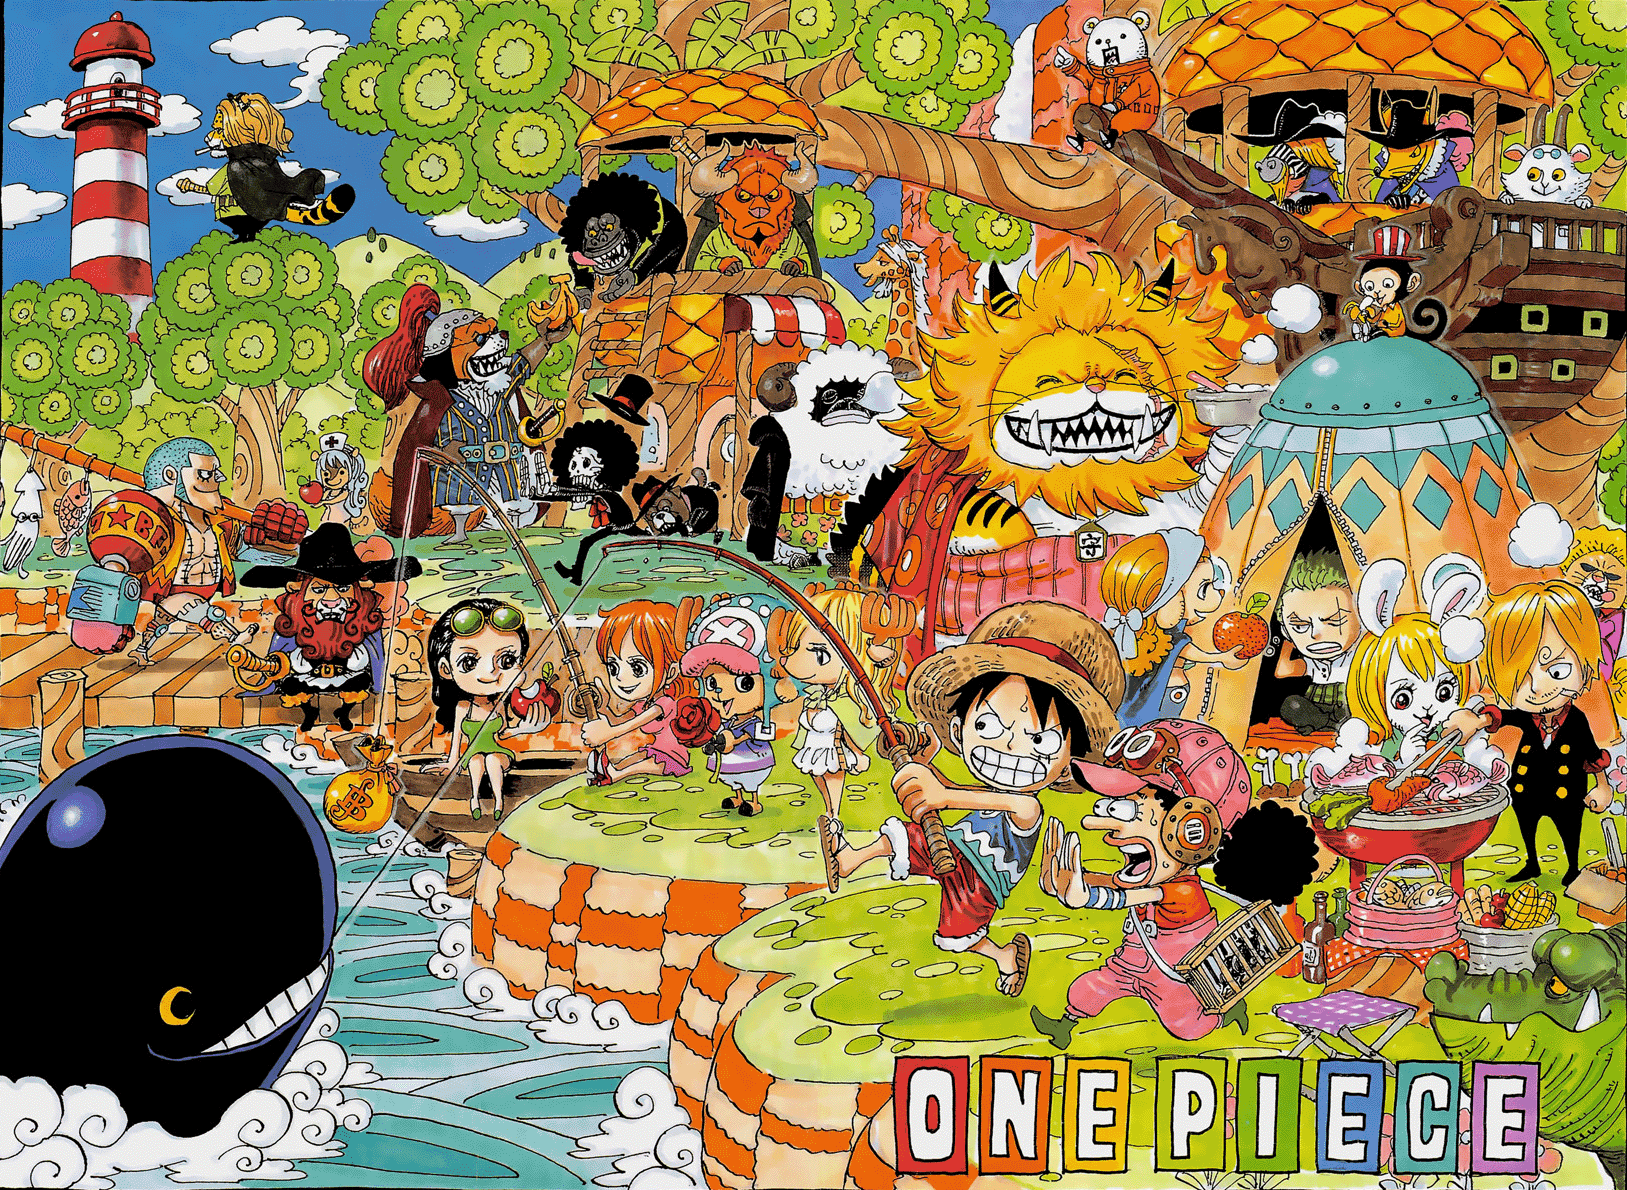 One Piece One Piece ワンピース 壁紙 ファンポップ